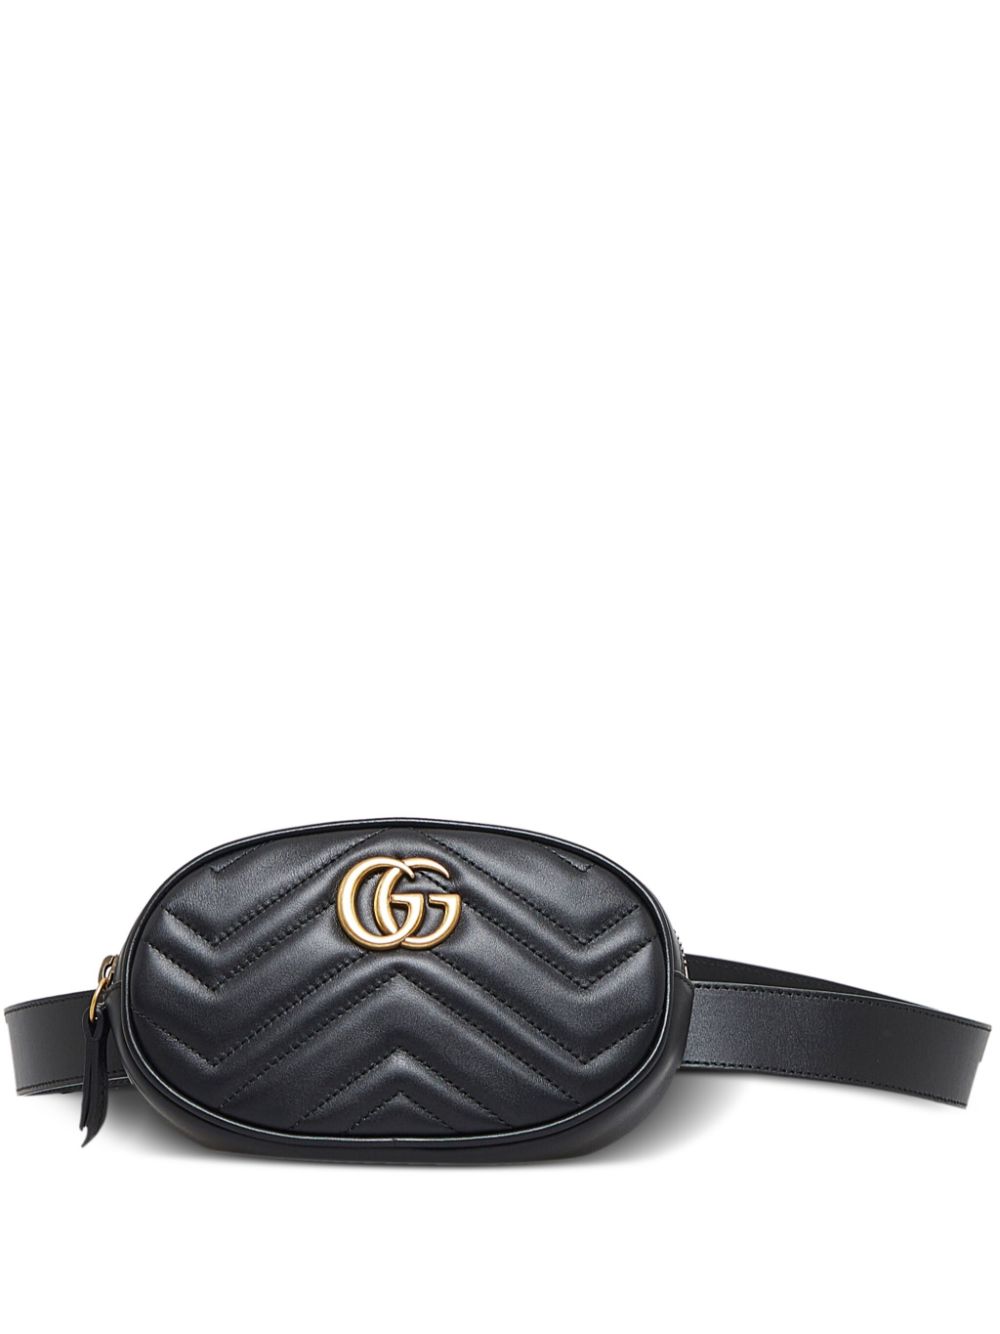 Pre-owned Gucci Gg Marmont Belt Bag In Black